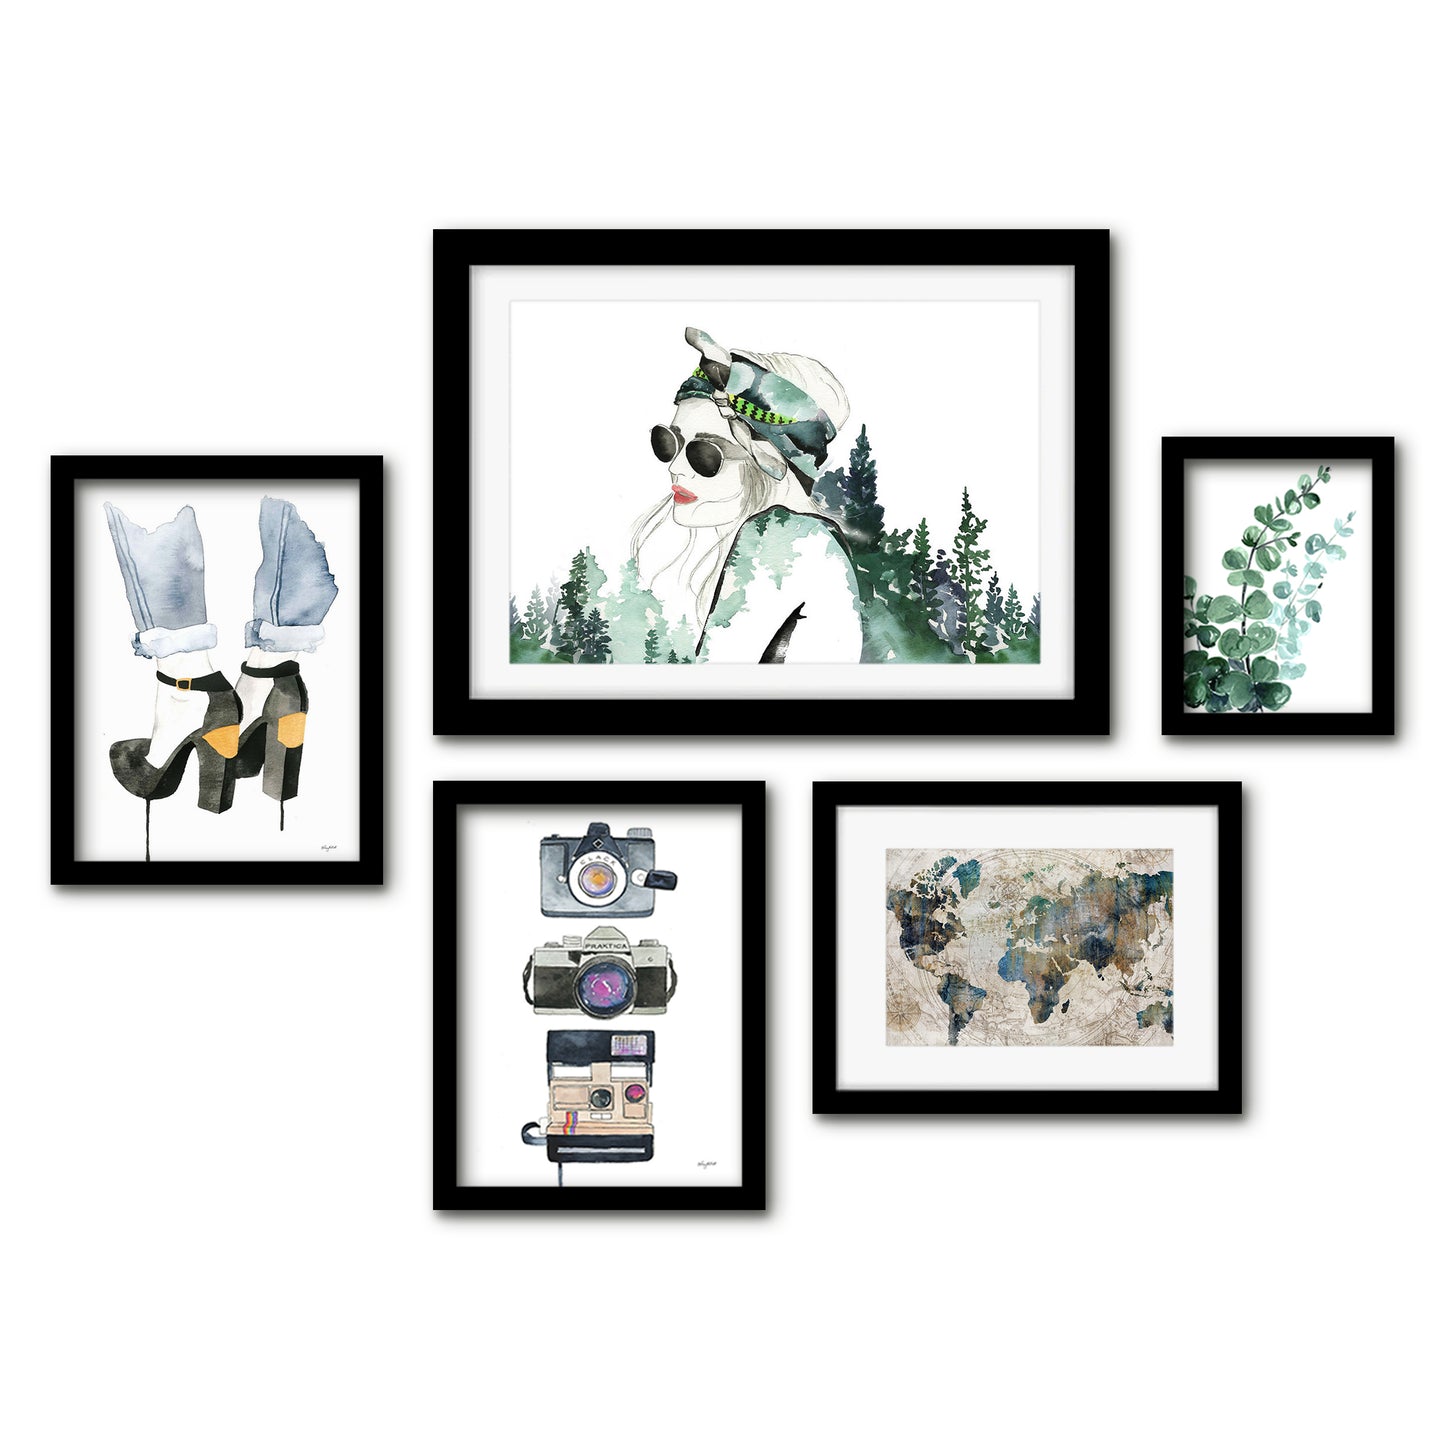 Americanflat 5 Piece Black Framed Gallery Wall Art Set - Watercolor Natural Female Travel